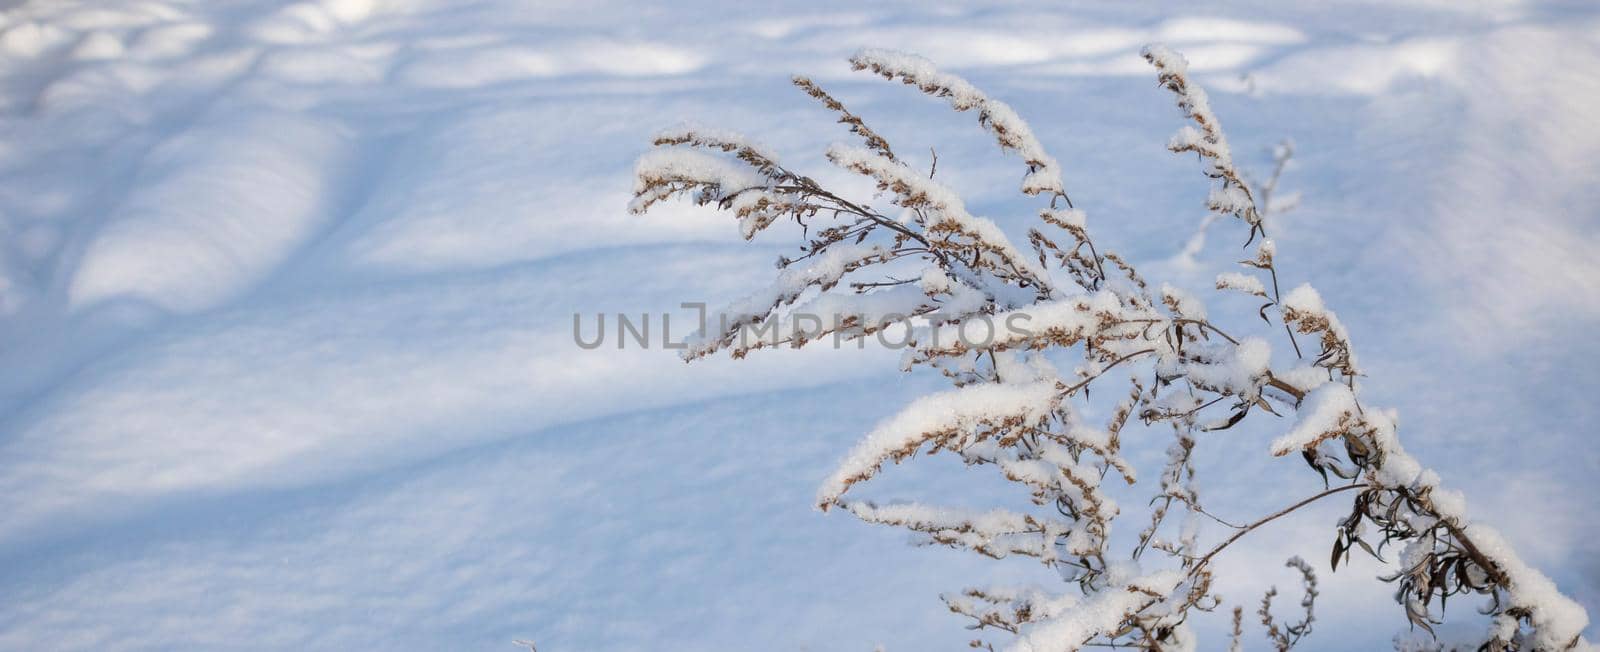 A dry branch of sagebrush in fluffy white snow after a snowfall.